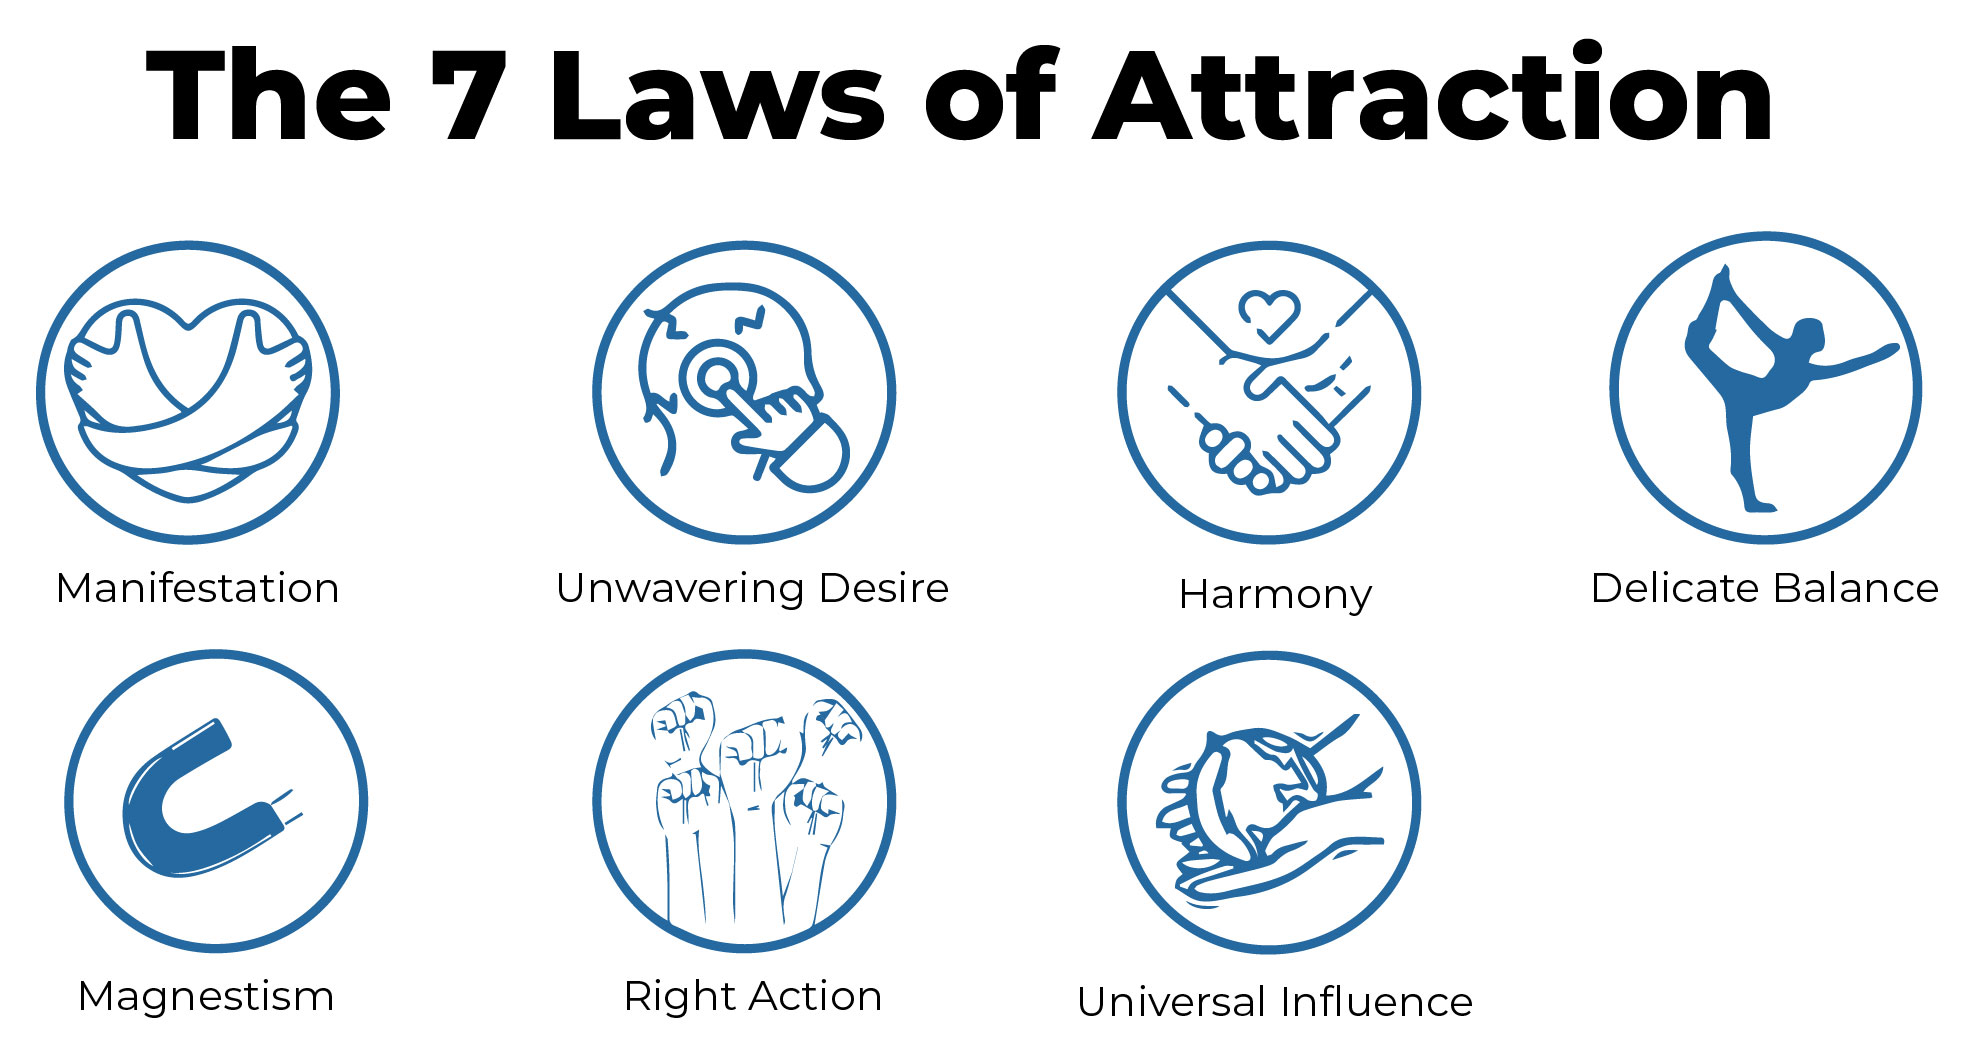 THE 7 LAWS OF ATTRACTION